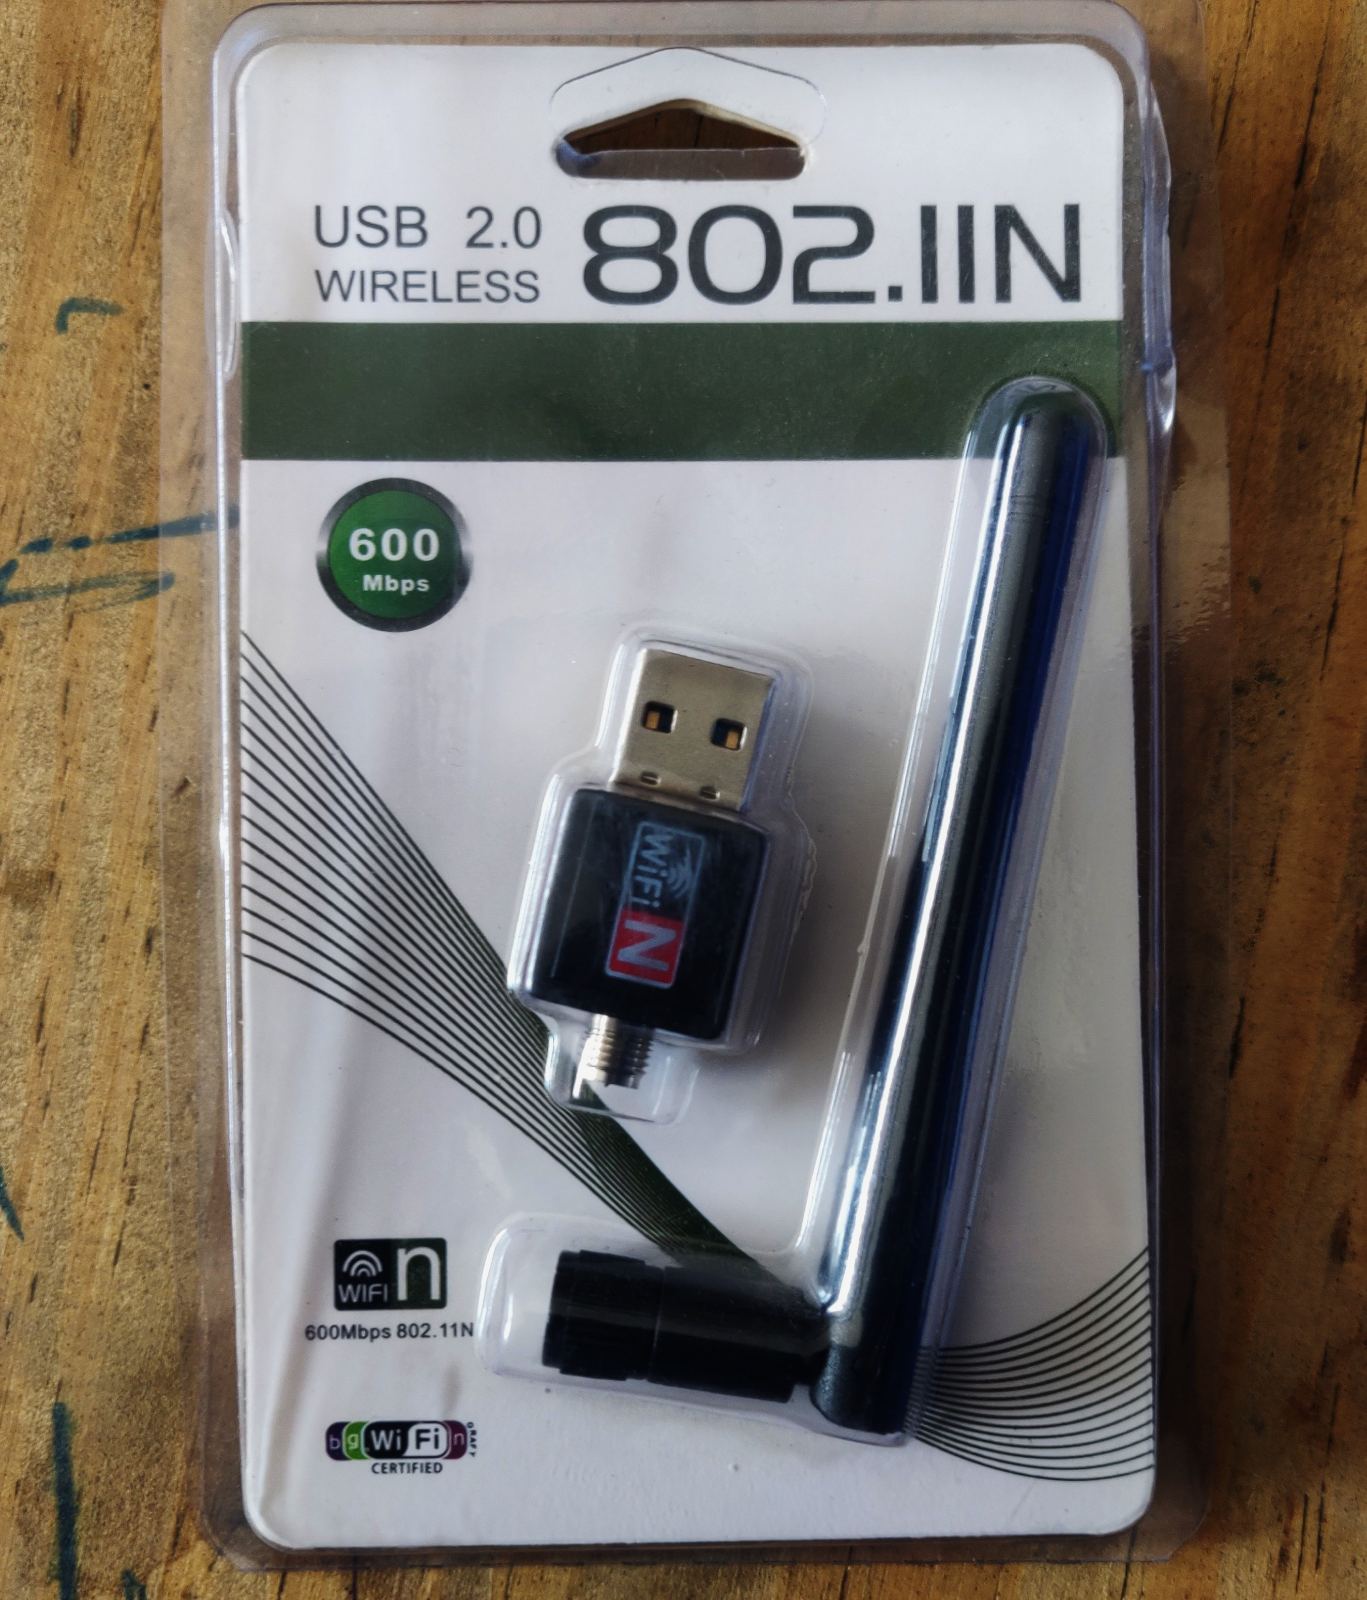 USB Wireless LAN Card Driver Free For Buy Online at Best Nepal | Daraz.com.np